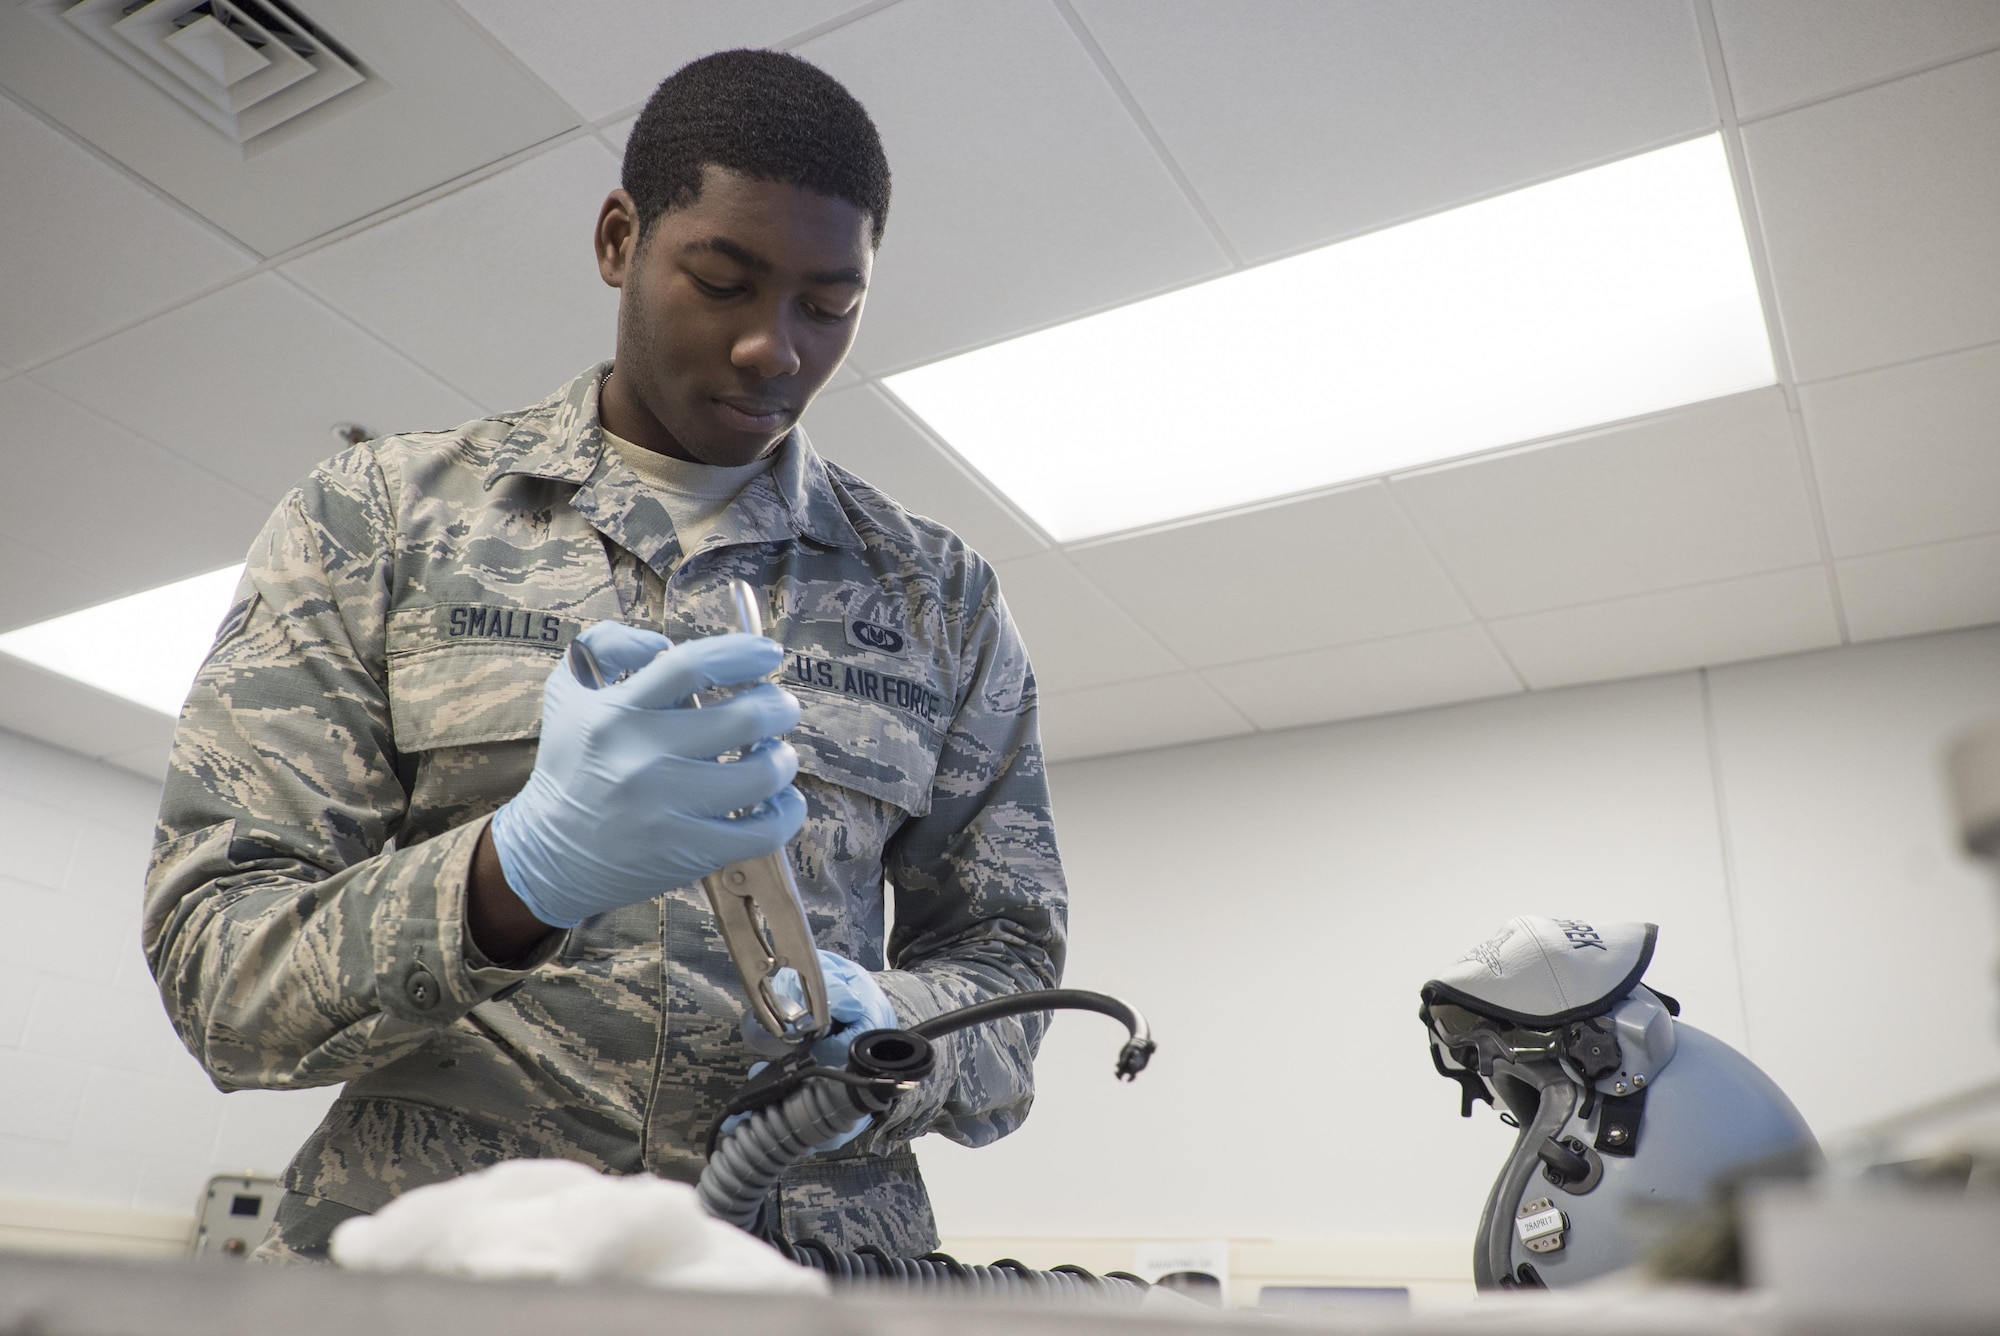 Airman 1st Class Khalil Smalls, 339th Flight Test Squadron aircrew flight equipment helper, reassembles components of an MBU-20/P oxygen mask April 26, 2017, at Robins Air Force Base, Georgia. The mask provides pressure breathing for aircrew and reduces the probability of G-induced loss of consciousness. (U.S. Air Force photo by Jamal D. Sutter)